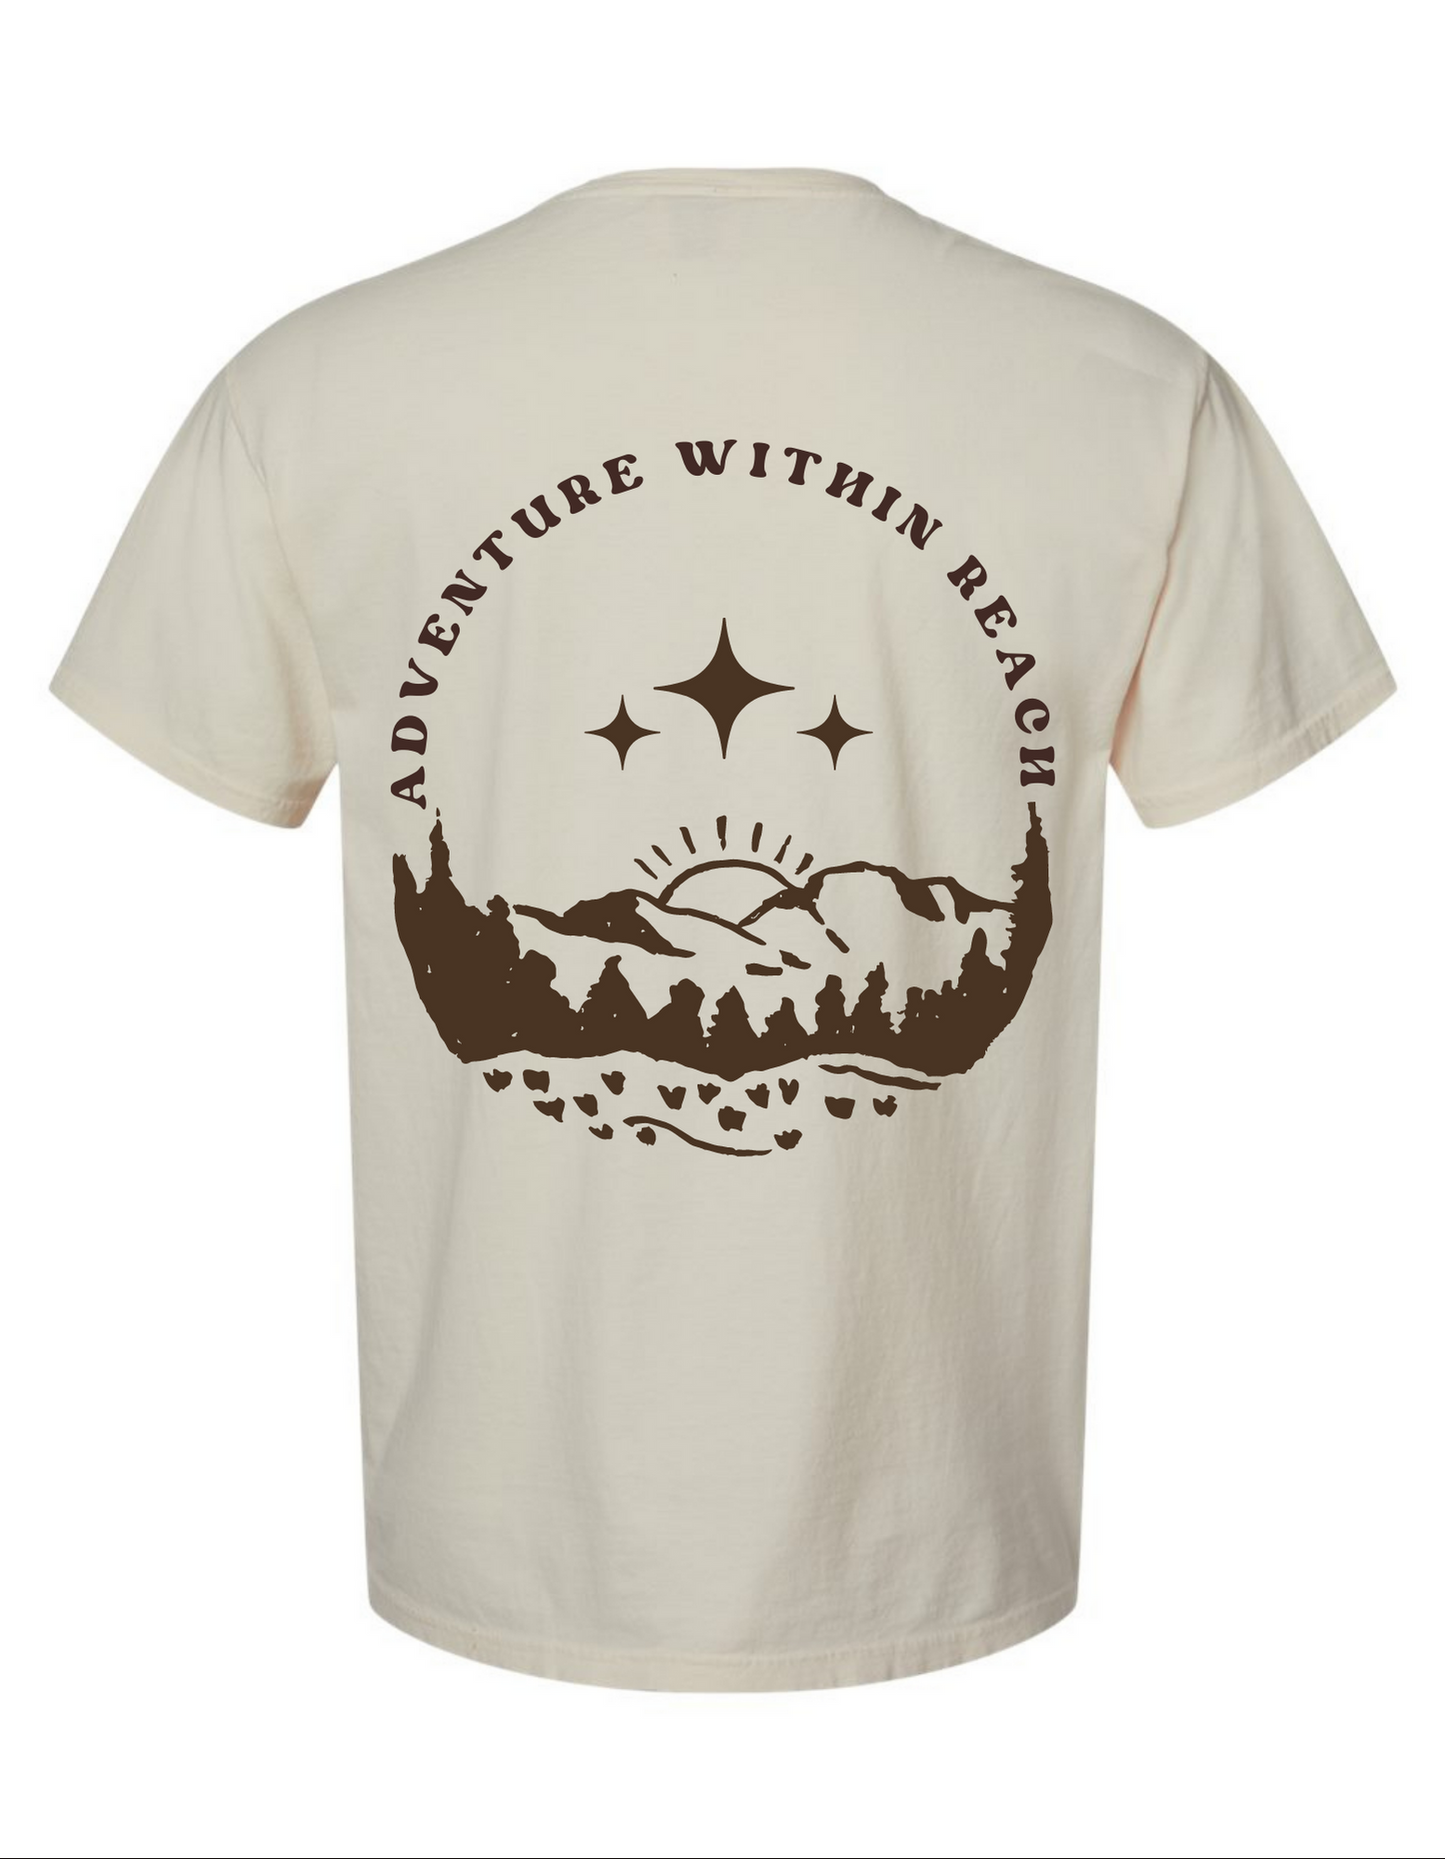 PNW Adventure Within Reach Garment Dyed Tee